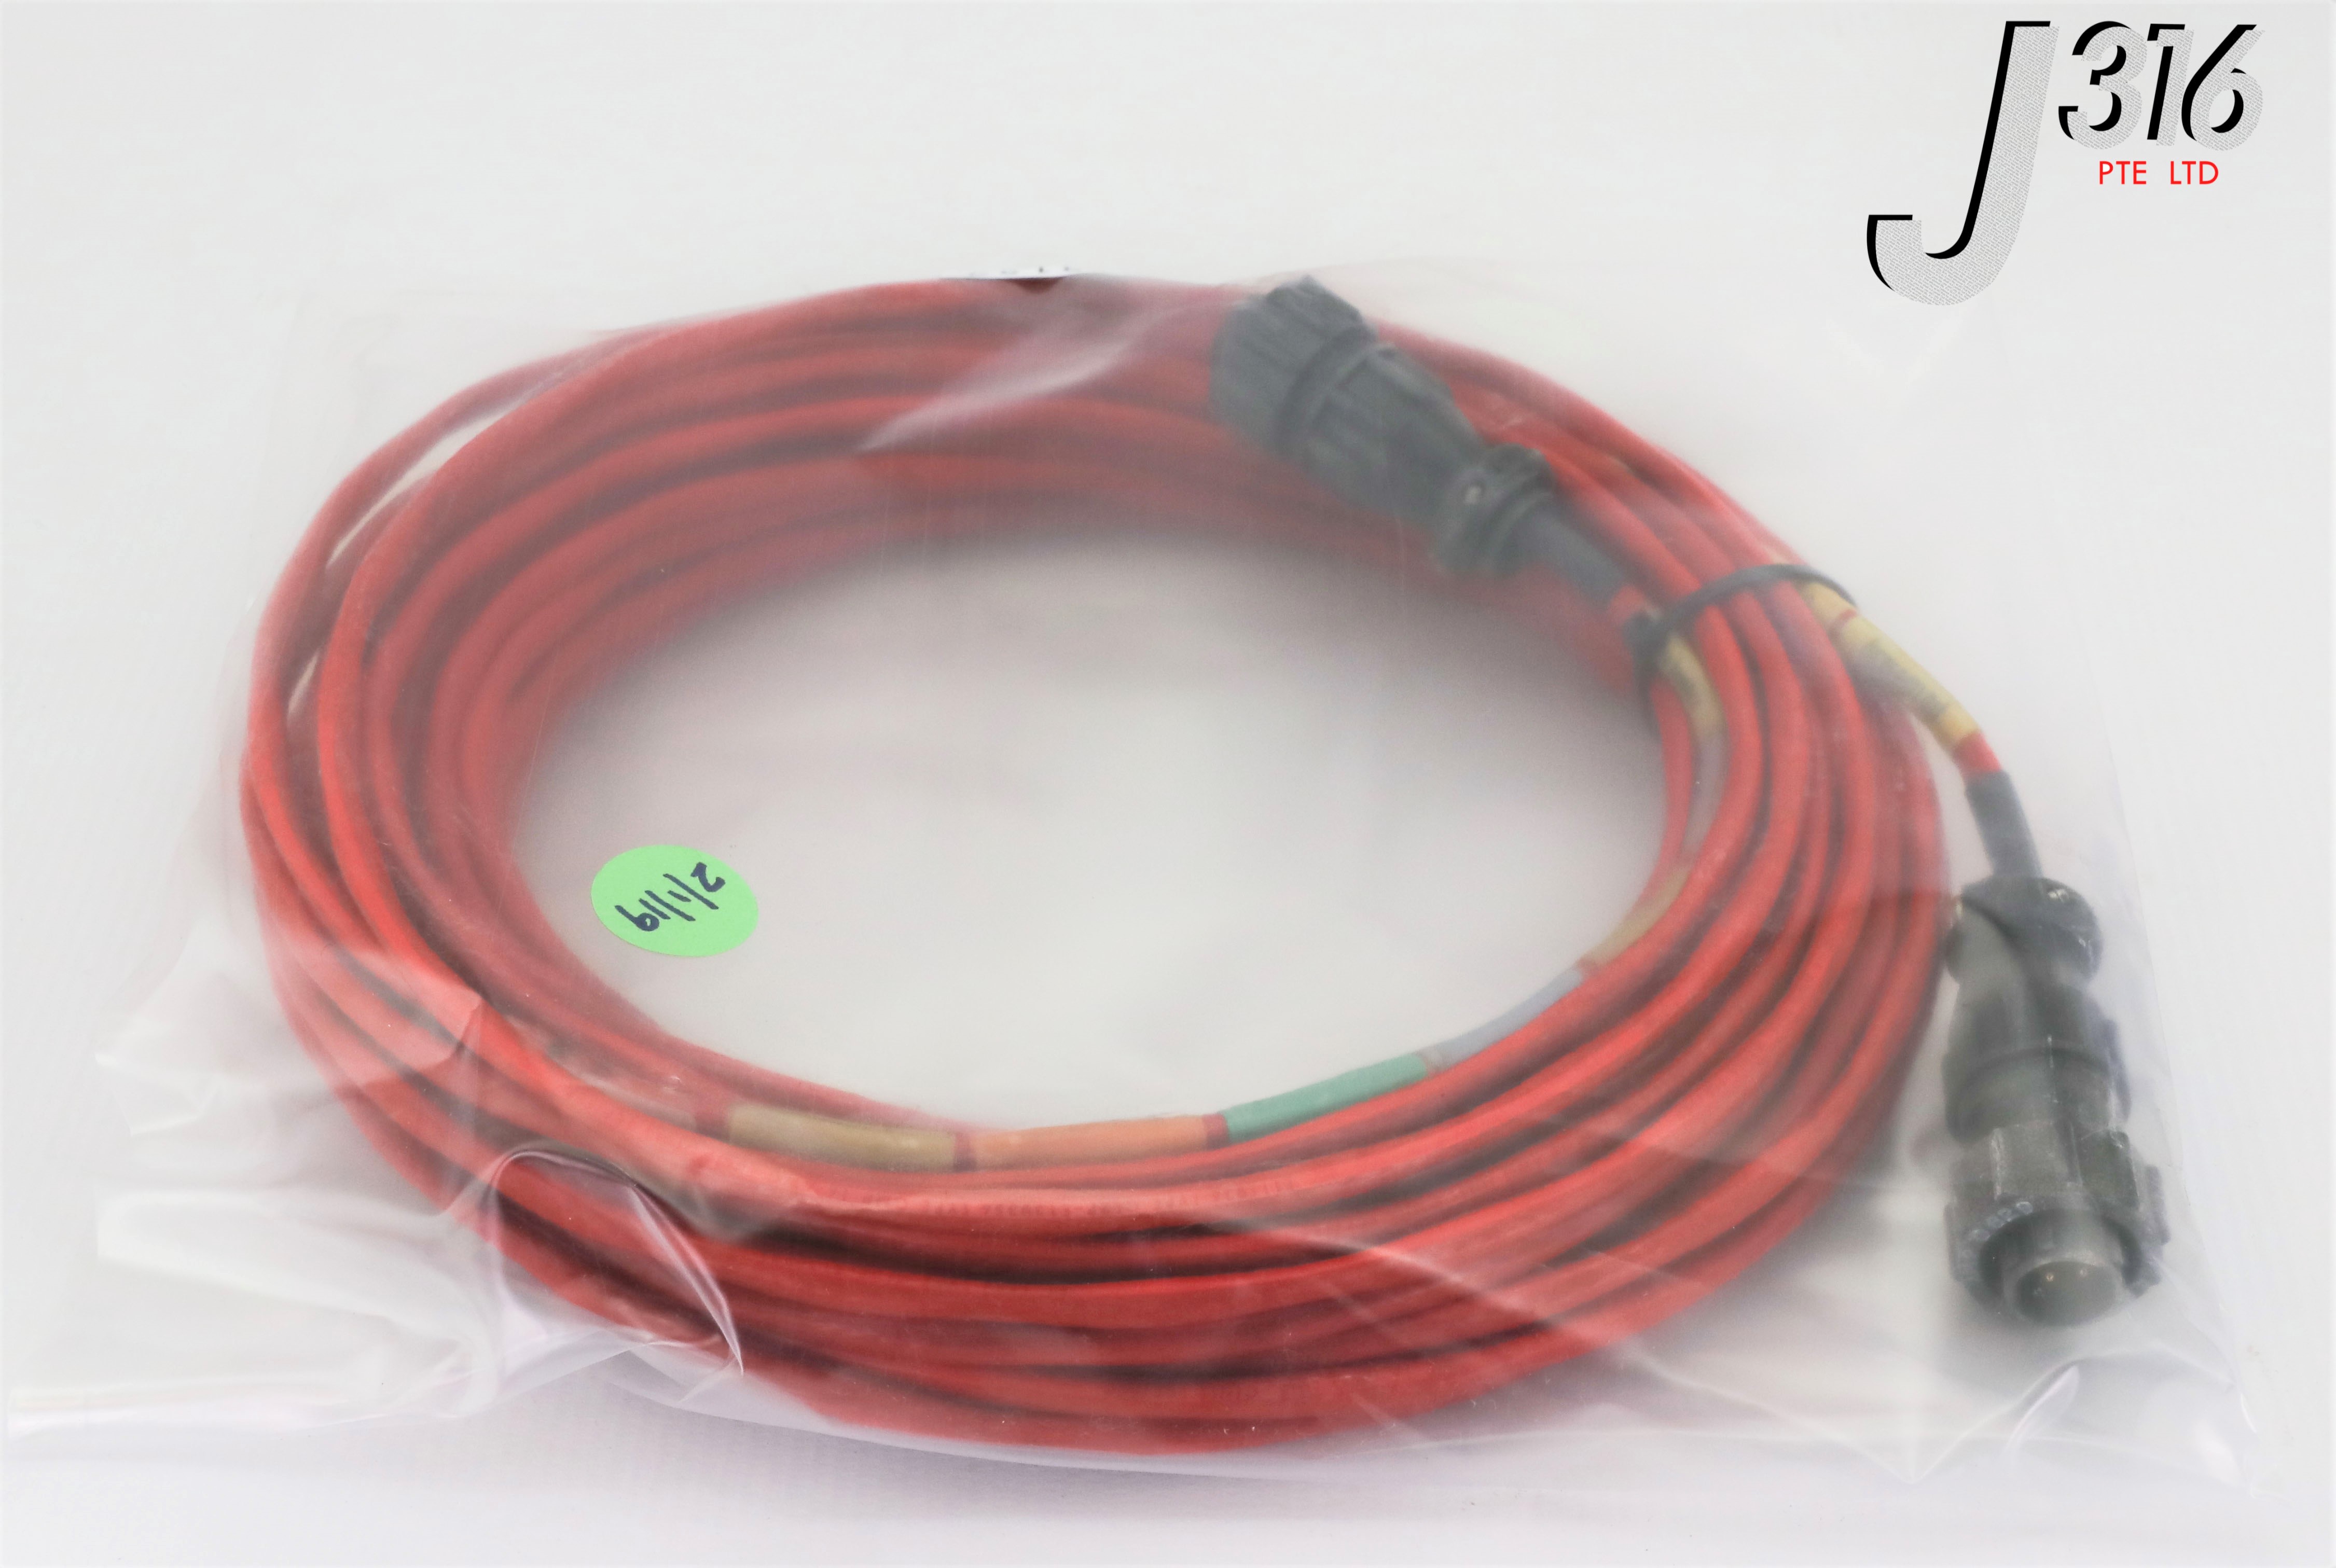 AMAT 0150-21861 CABLE ASSY REV 002  RTRON 